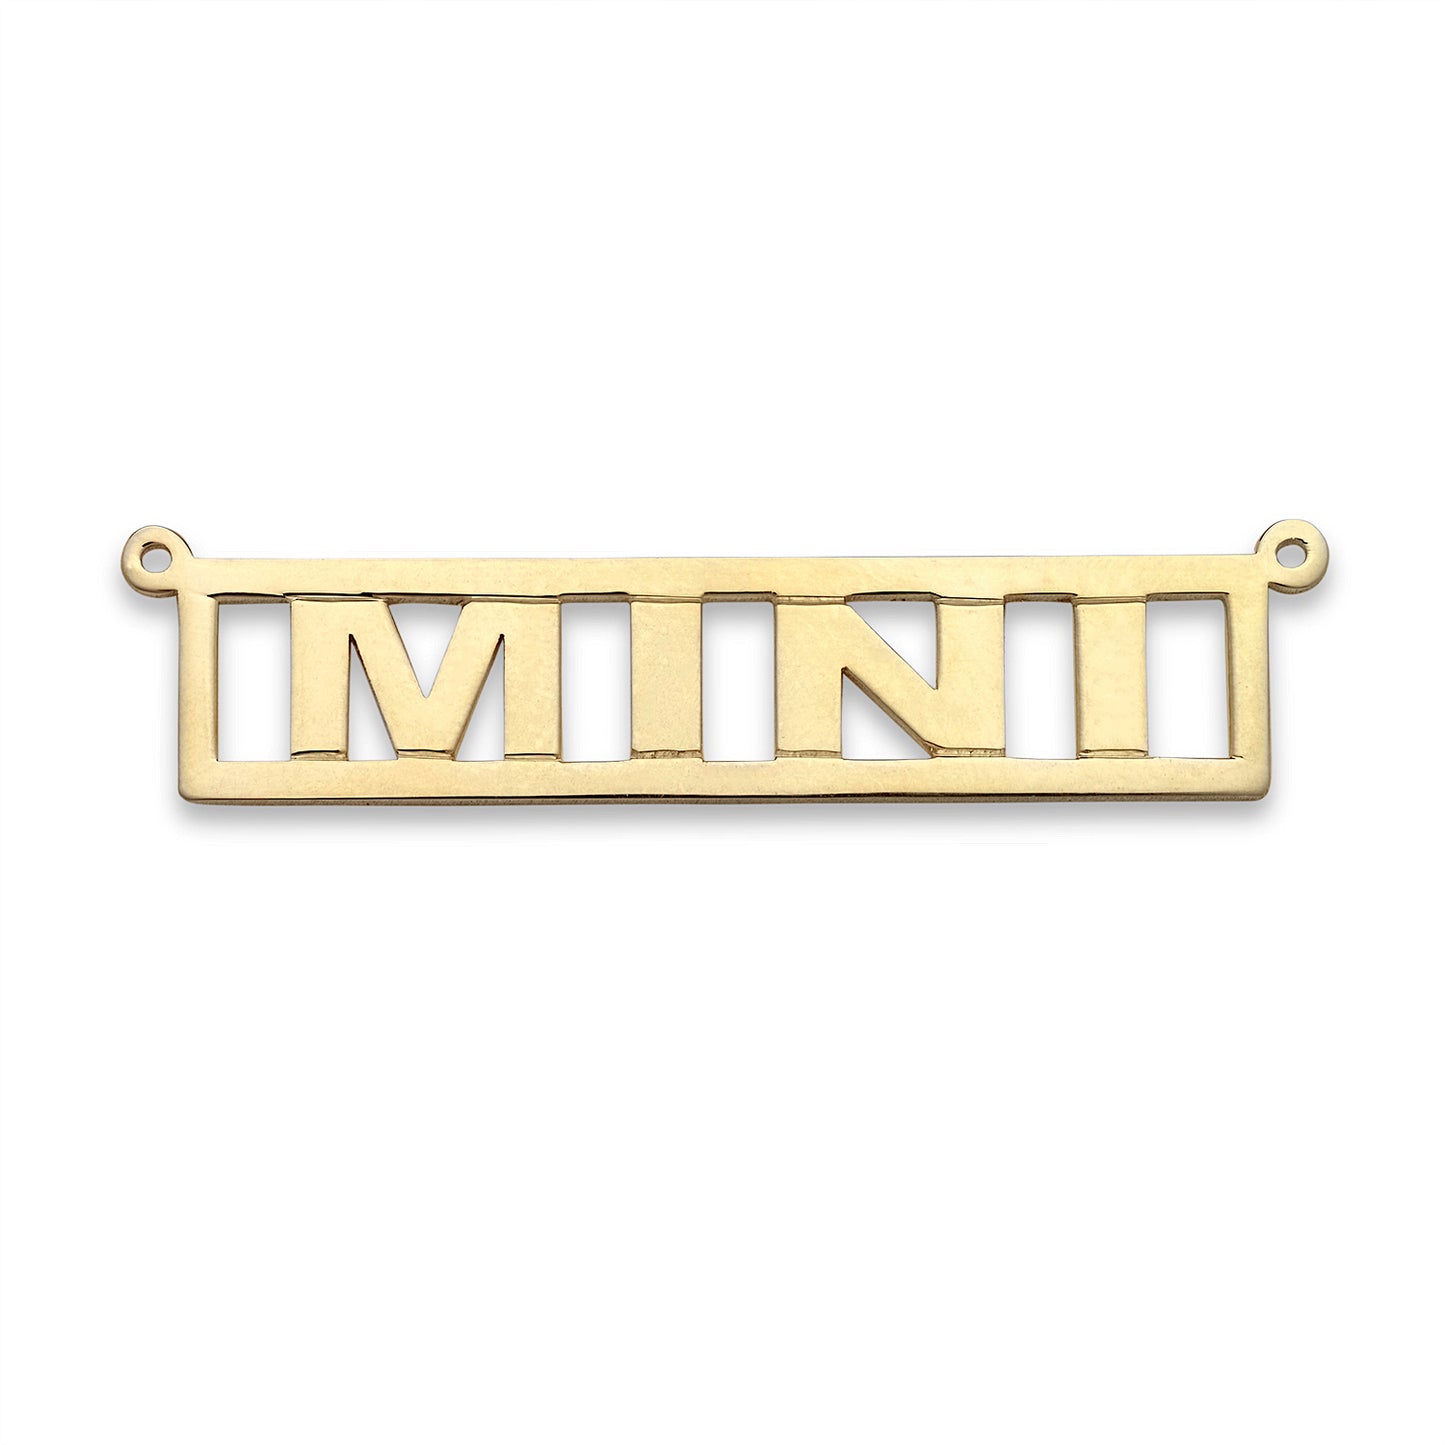 Better Jewelry Block 10K Gold Nameplate Necklace